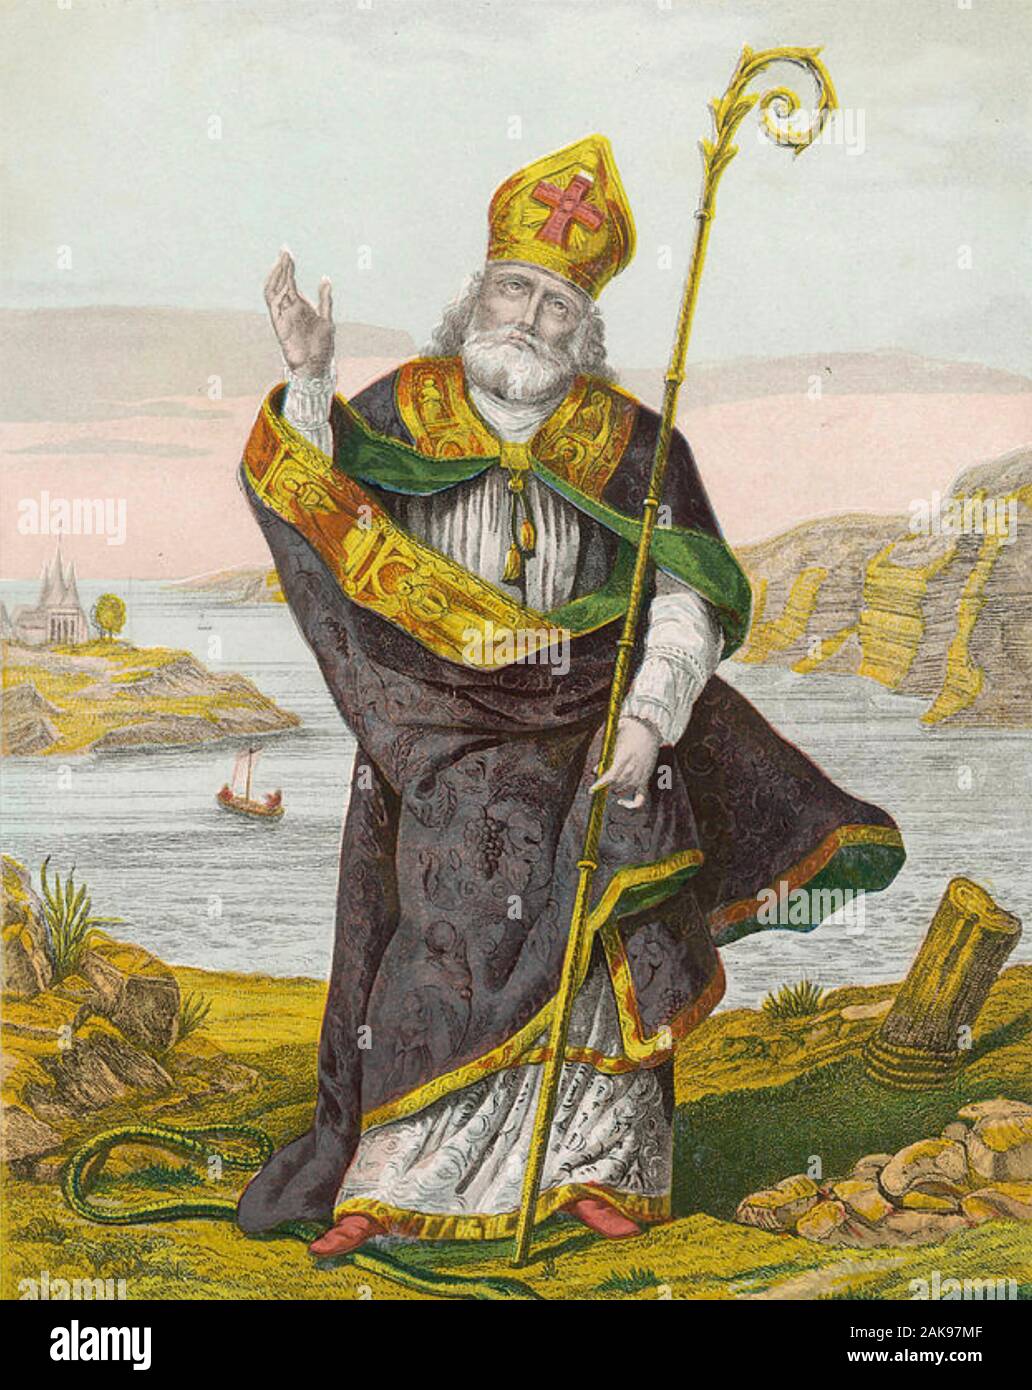 ST PATRICK in a 19th century illustration Stock Photo